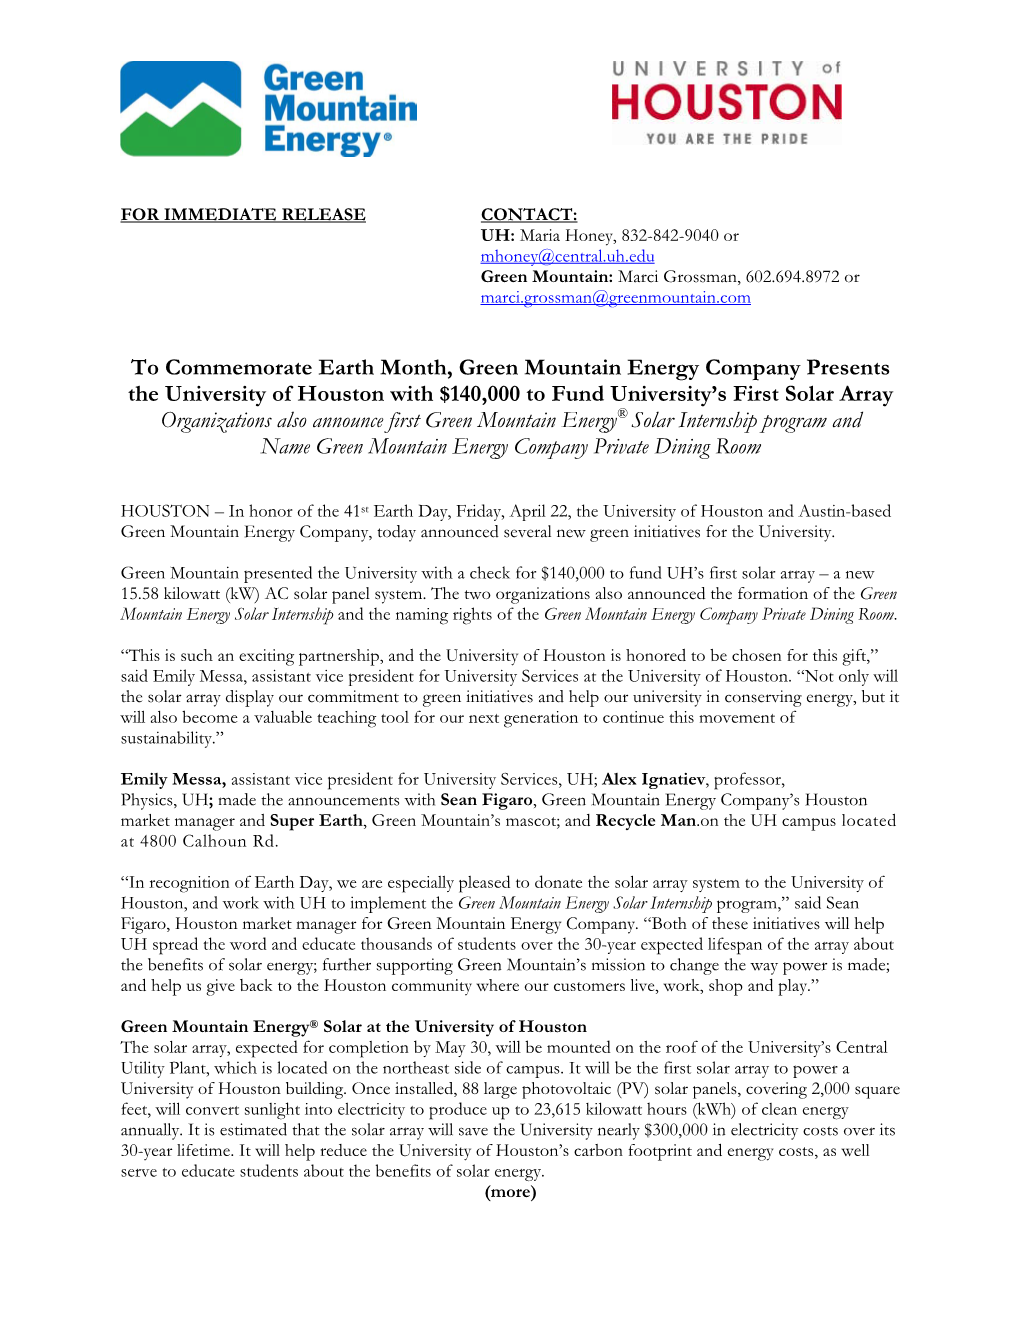 To Commemorate Earth Month, Green Mountain Energy Presents UH With